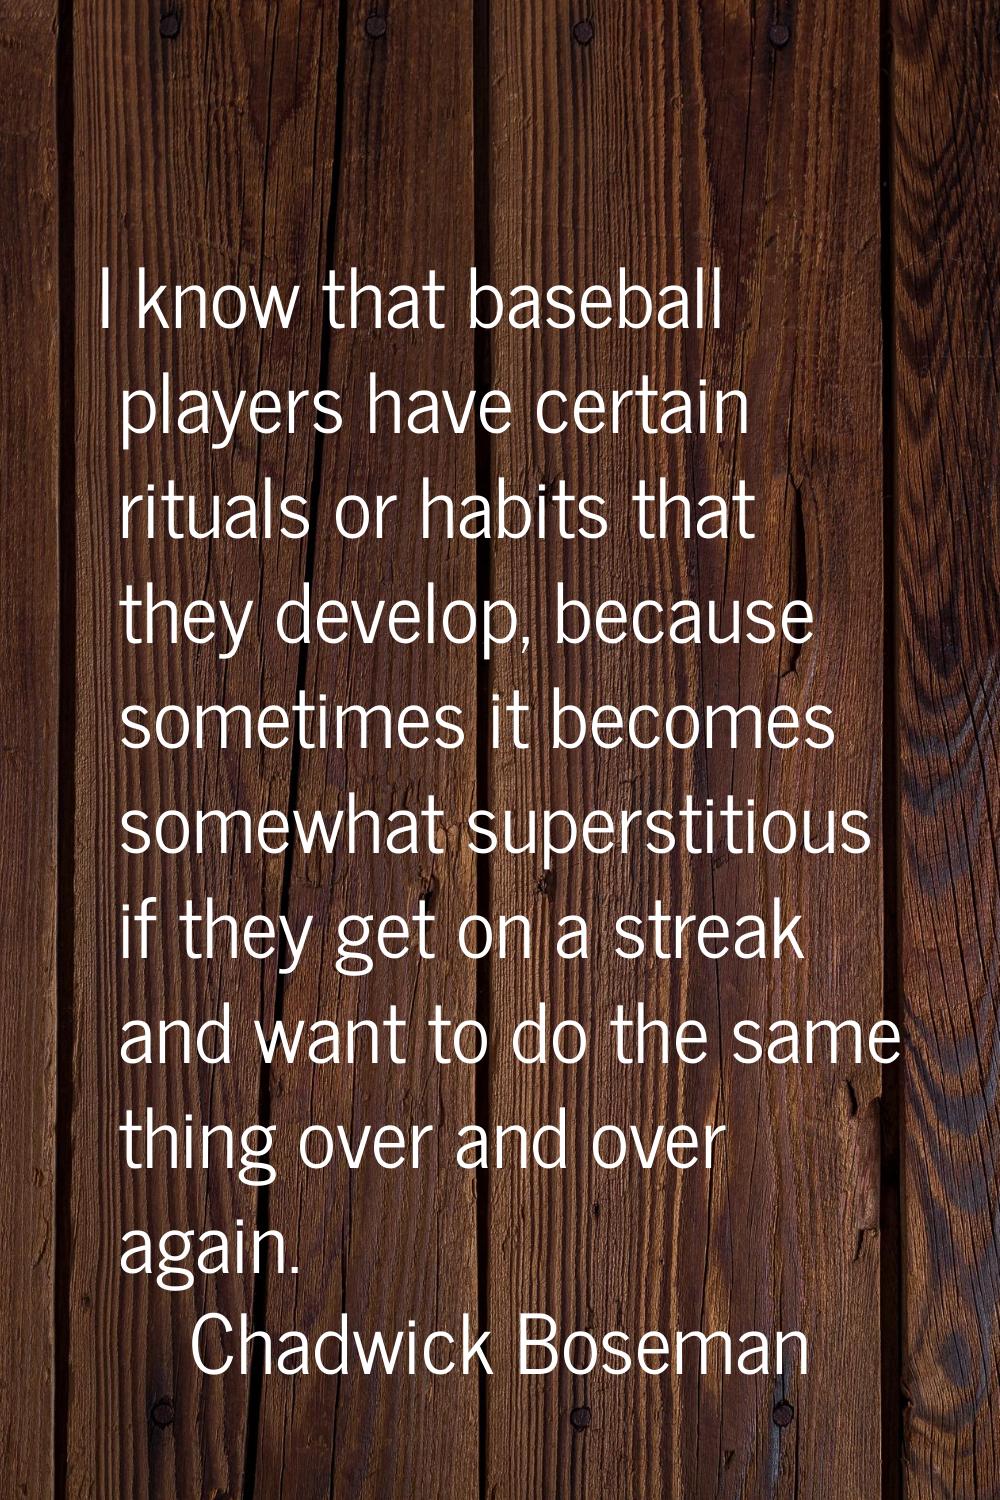 I know that baseball players have certain rituals or habits that they develop, because sometimes it